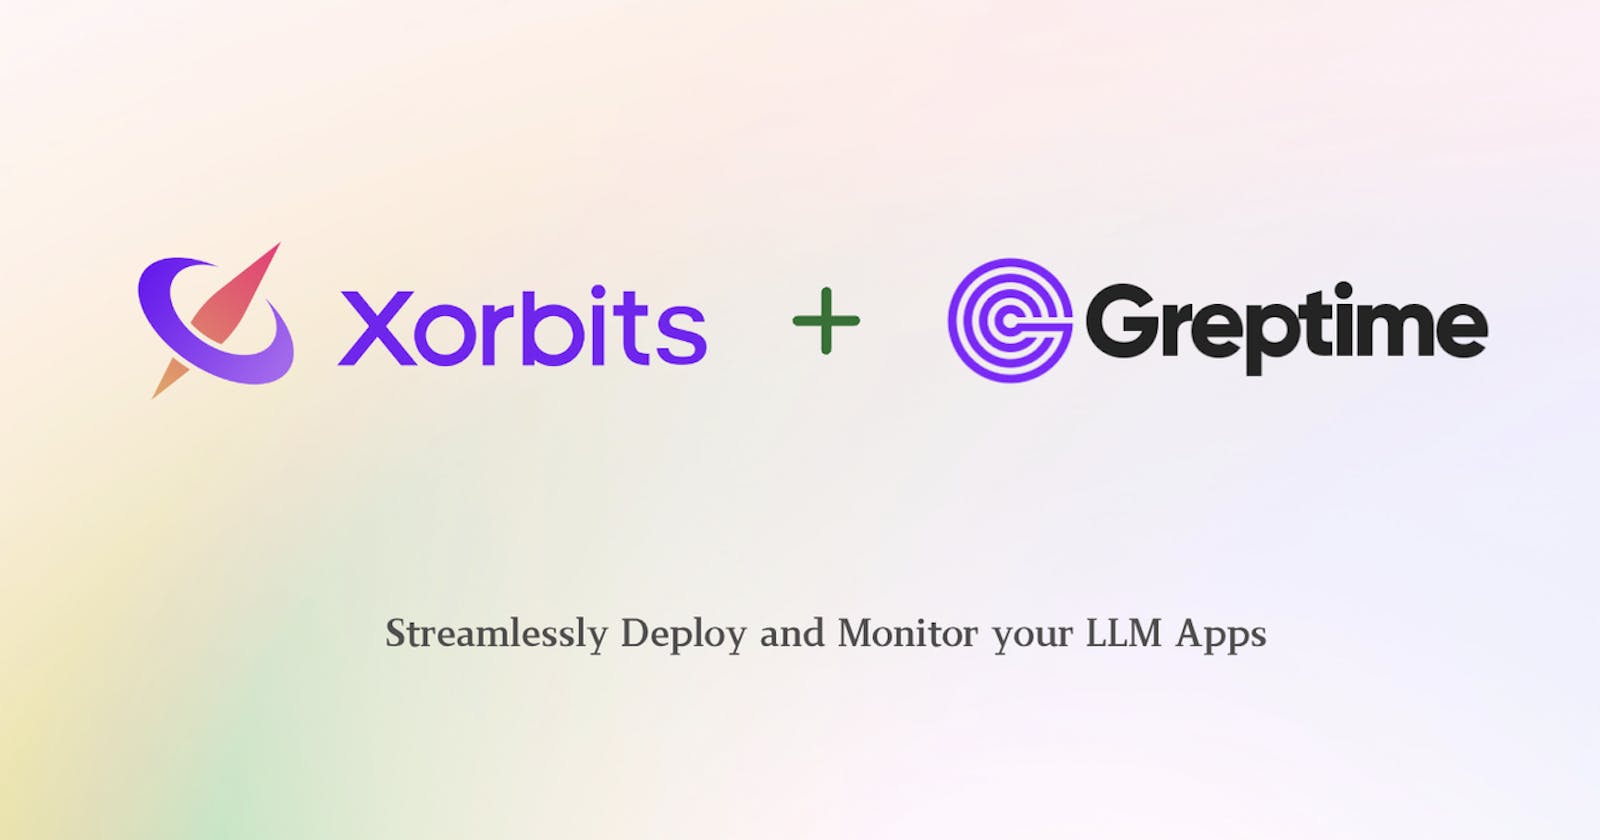 GreptimeAI + Xinference - Efficient Deployment and Monitoring of Your LLM Applications